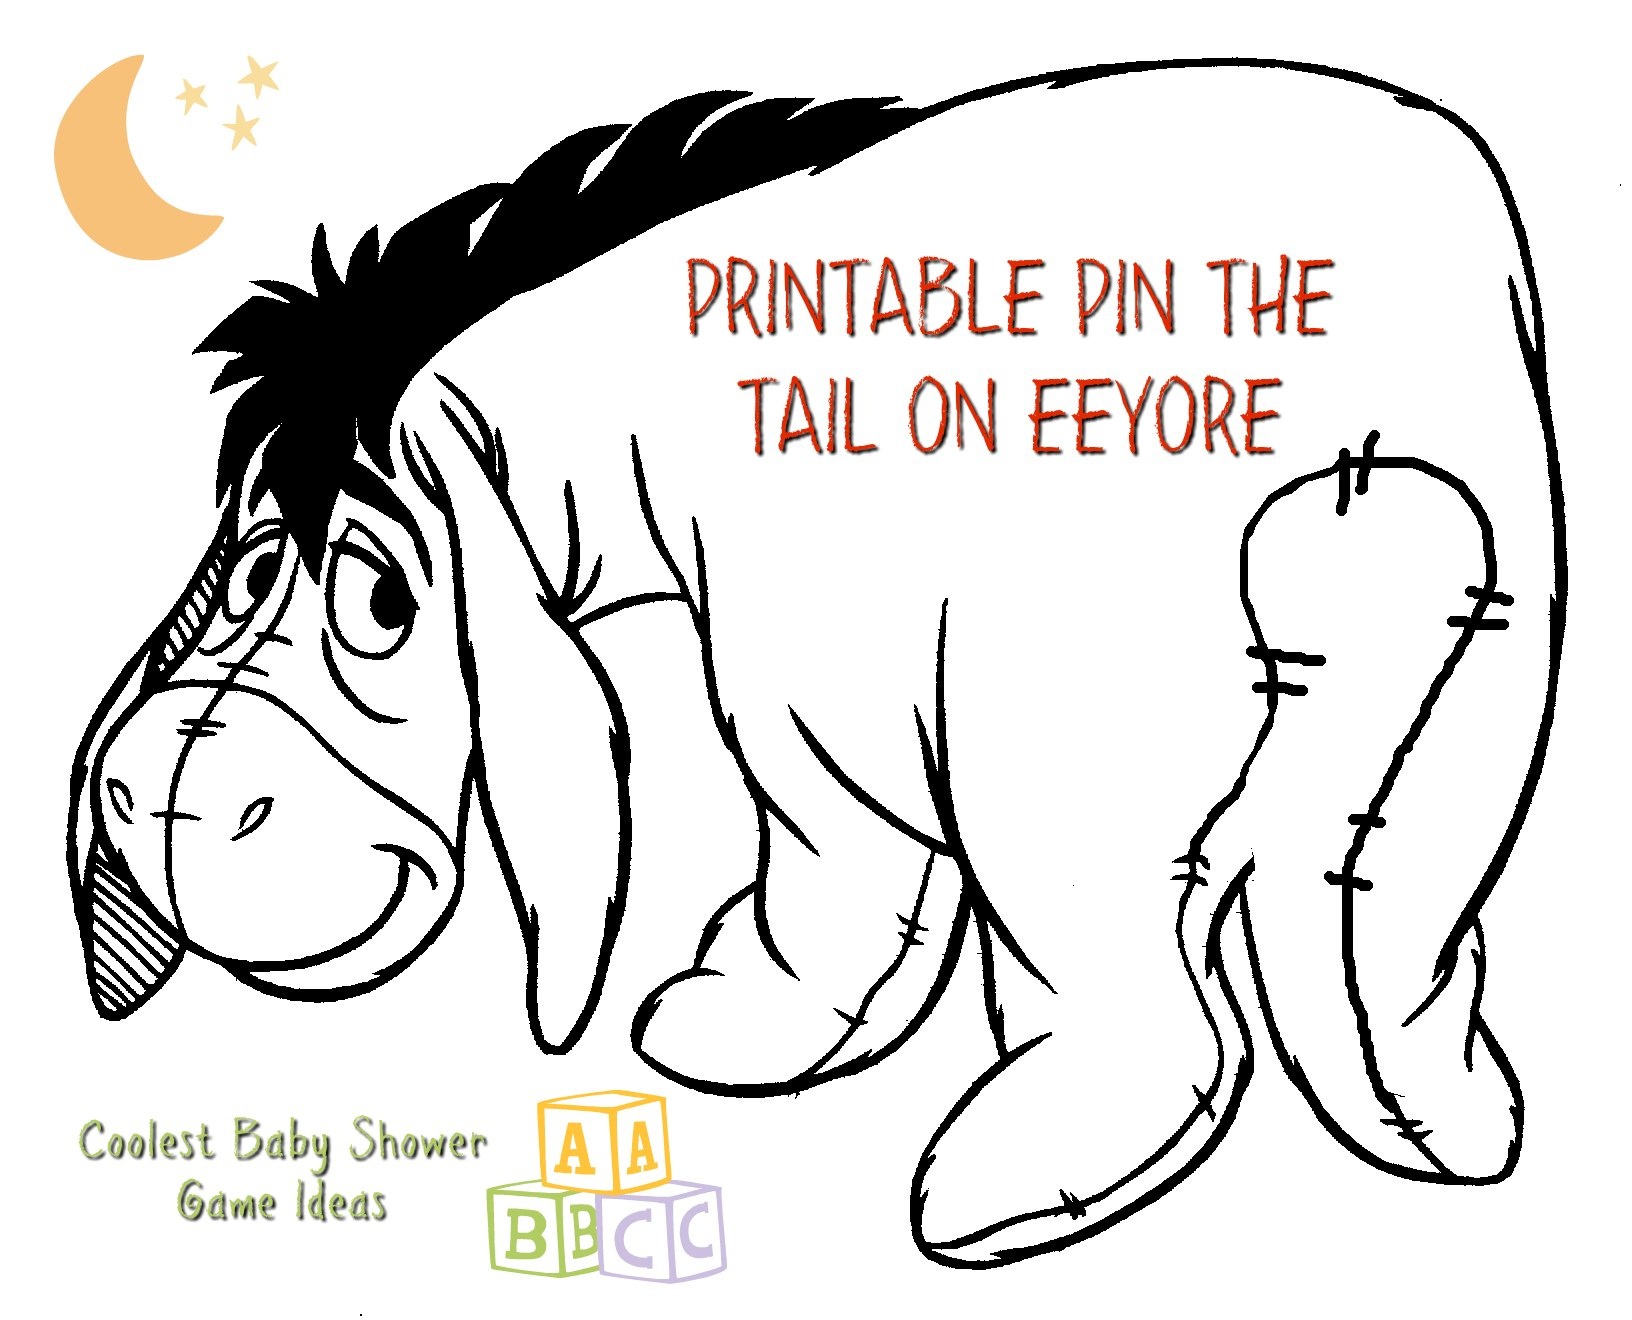 Coolest Winnie The Pooh Baby Shower Game Ideas - Free Printable Pin The Tail On The Cat